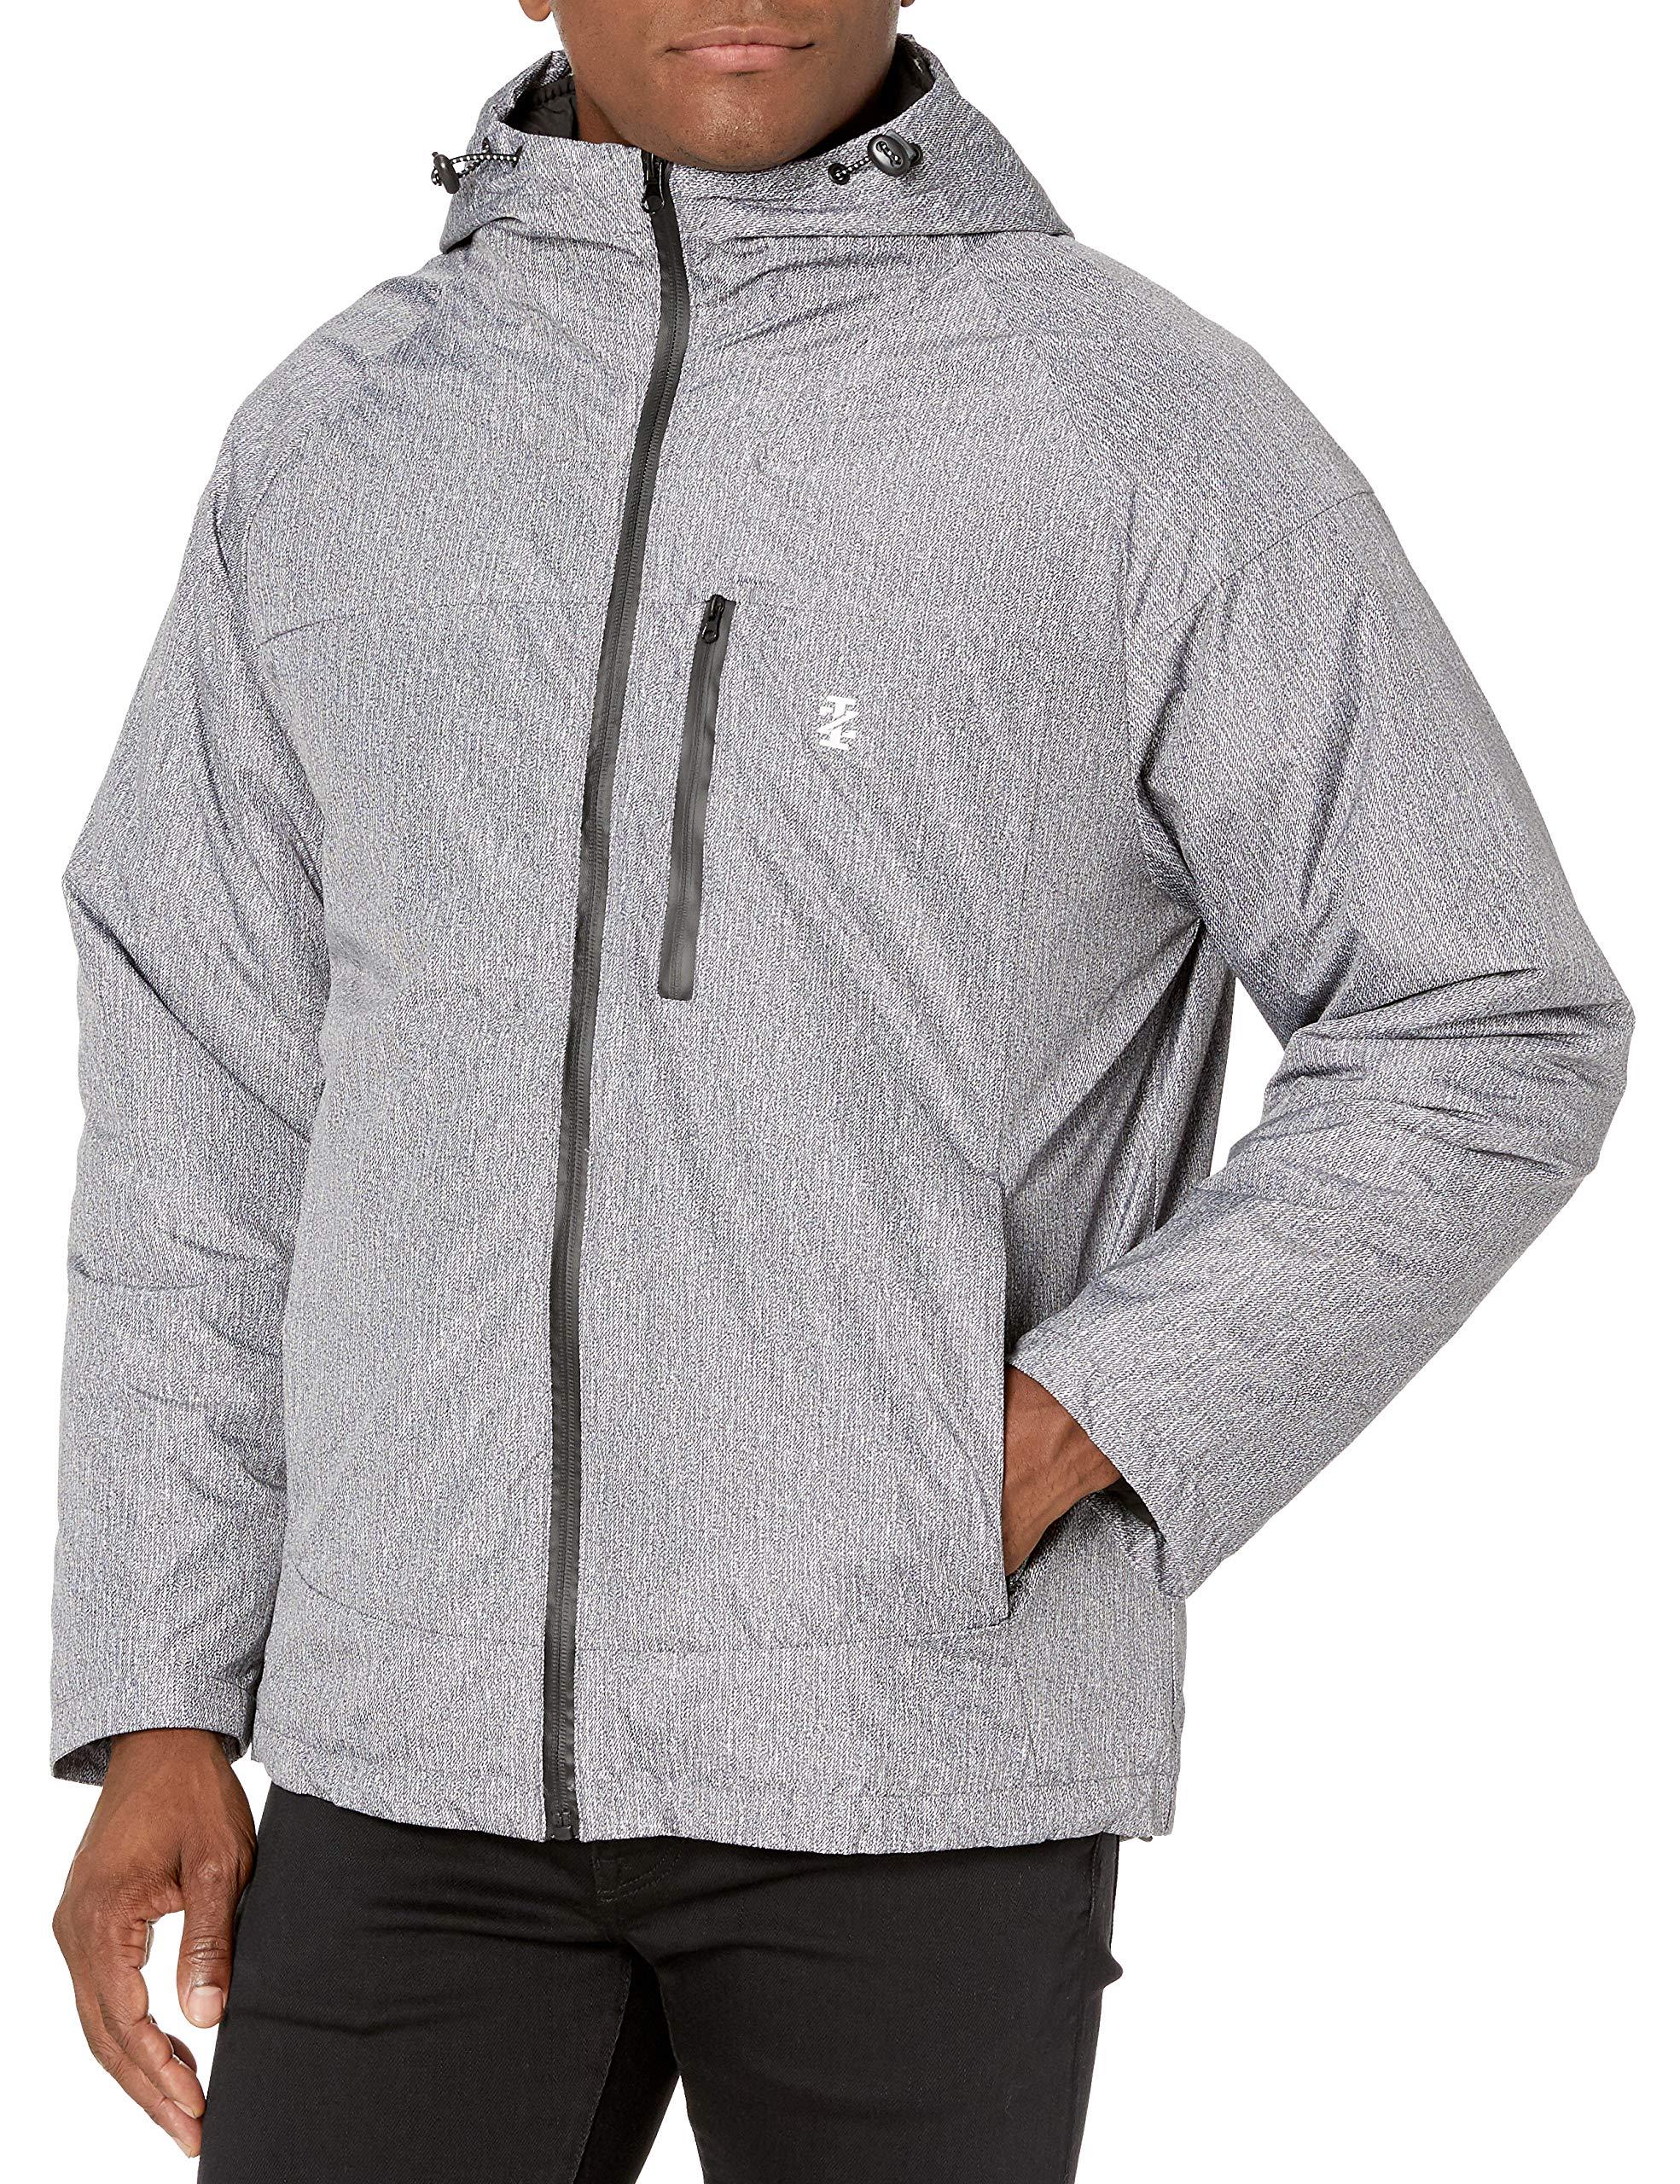 Izod Rip Stop Hooded 3-1 Systems Jacket in Charcoal/Heather (Gray) for